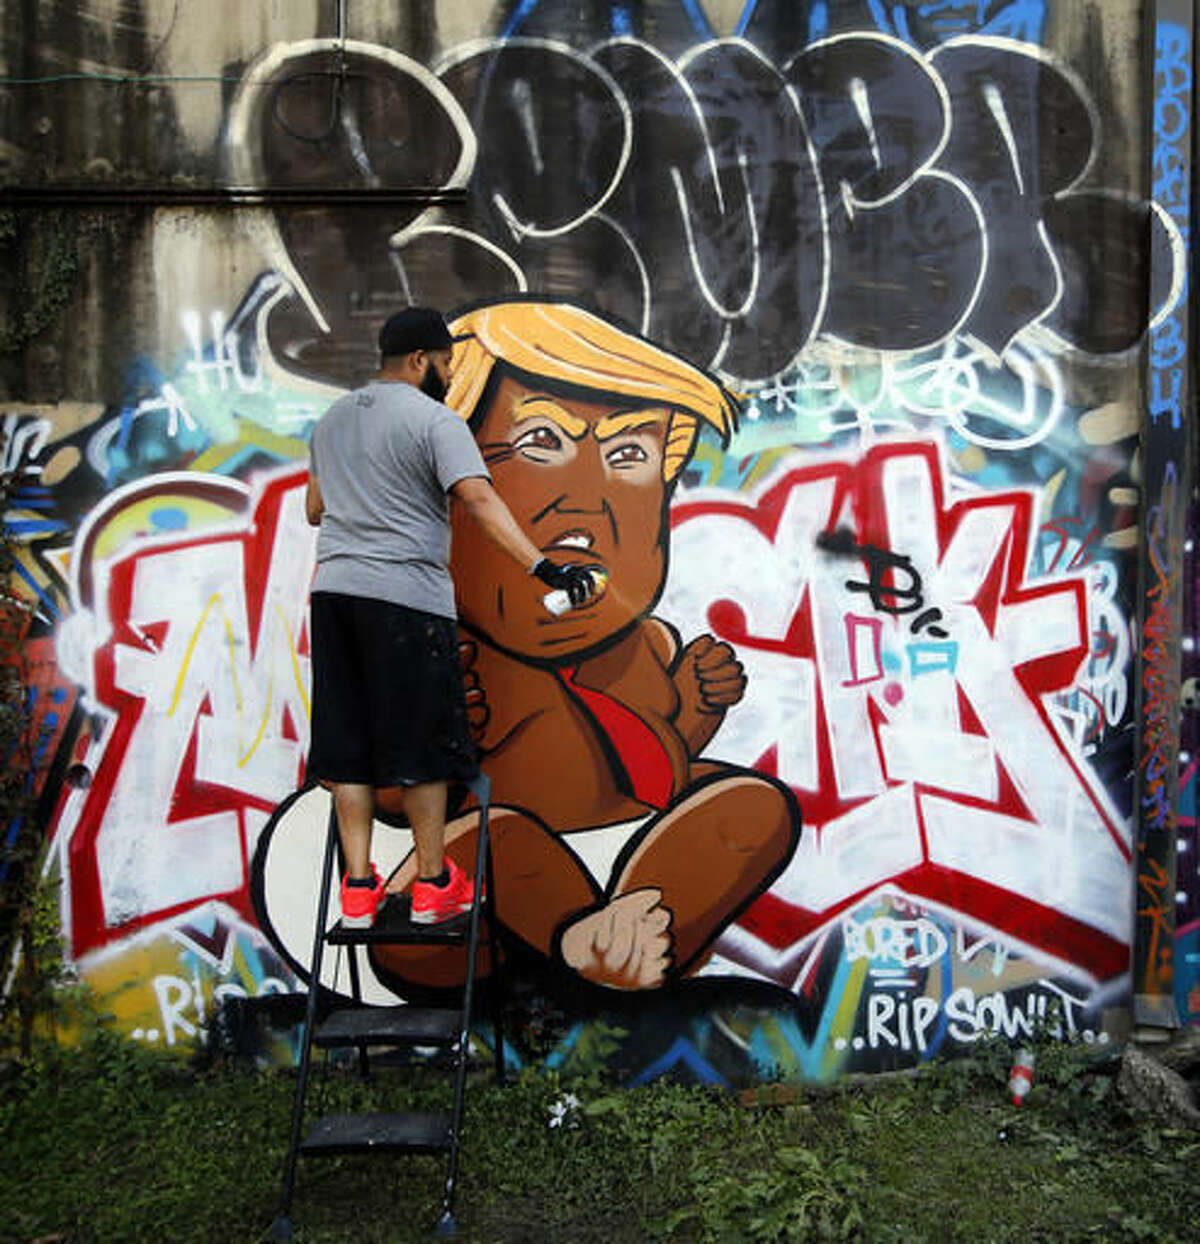 In a Saturday, Nov. 12, 2016 photo, Dallas artist Jeremy Biggers clears his spray can as he paints a caricature of President-elect Donald Trump during GO PAINT DAY at the Fabrication Yard in Dallas. This is only the third time the realism painter has created artwork with a spray can. The two days are dedicated to celebrating hip hop history month with paint, music, dancing and community. (Tom Fox/The Dallas Morning News via AP)